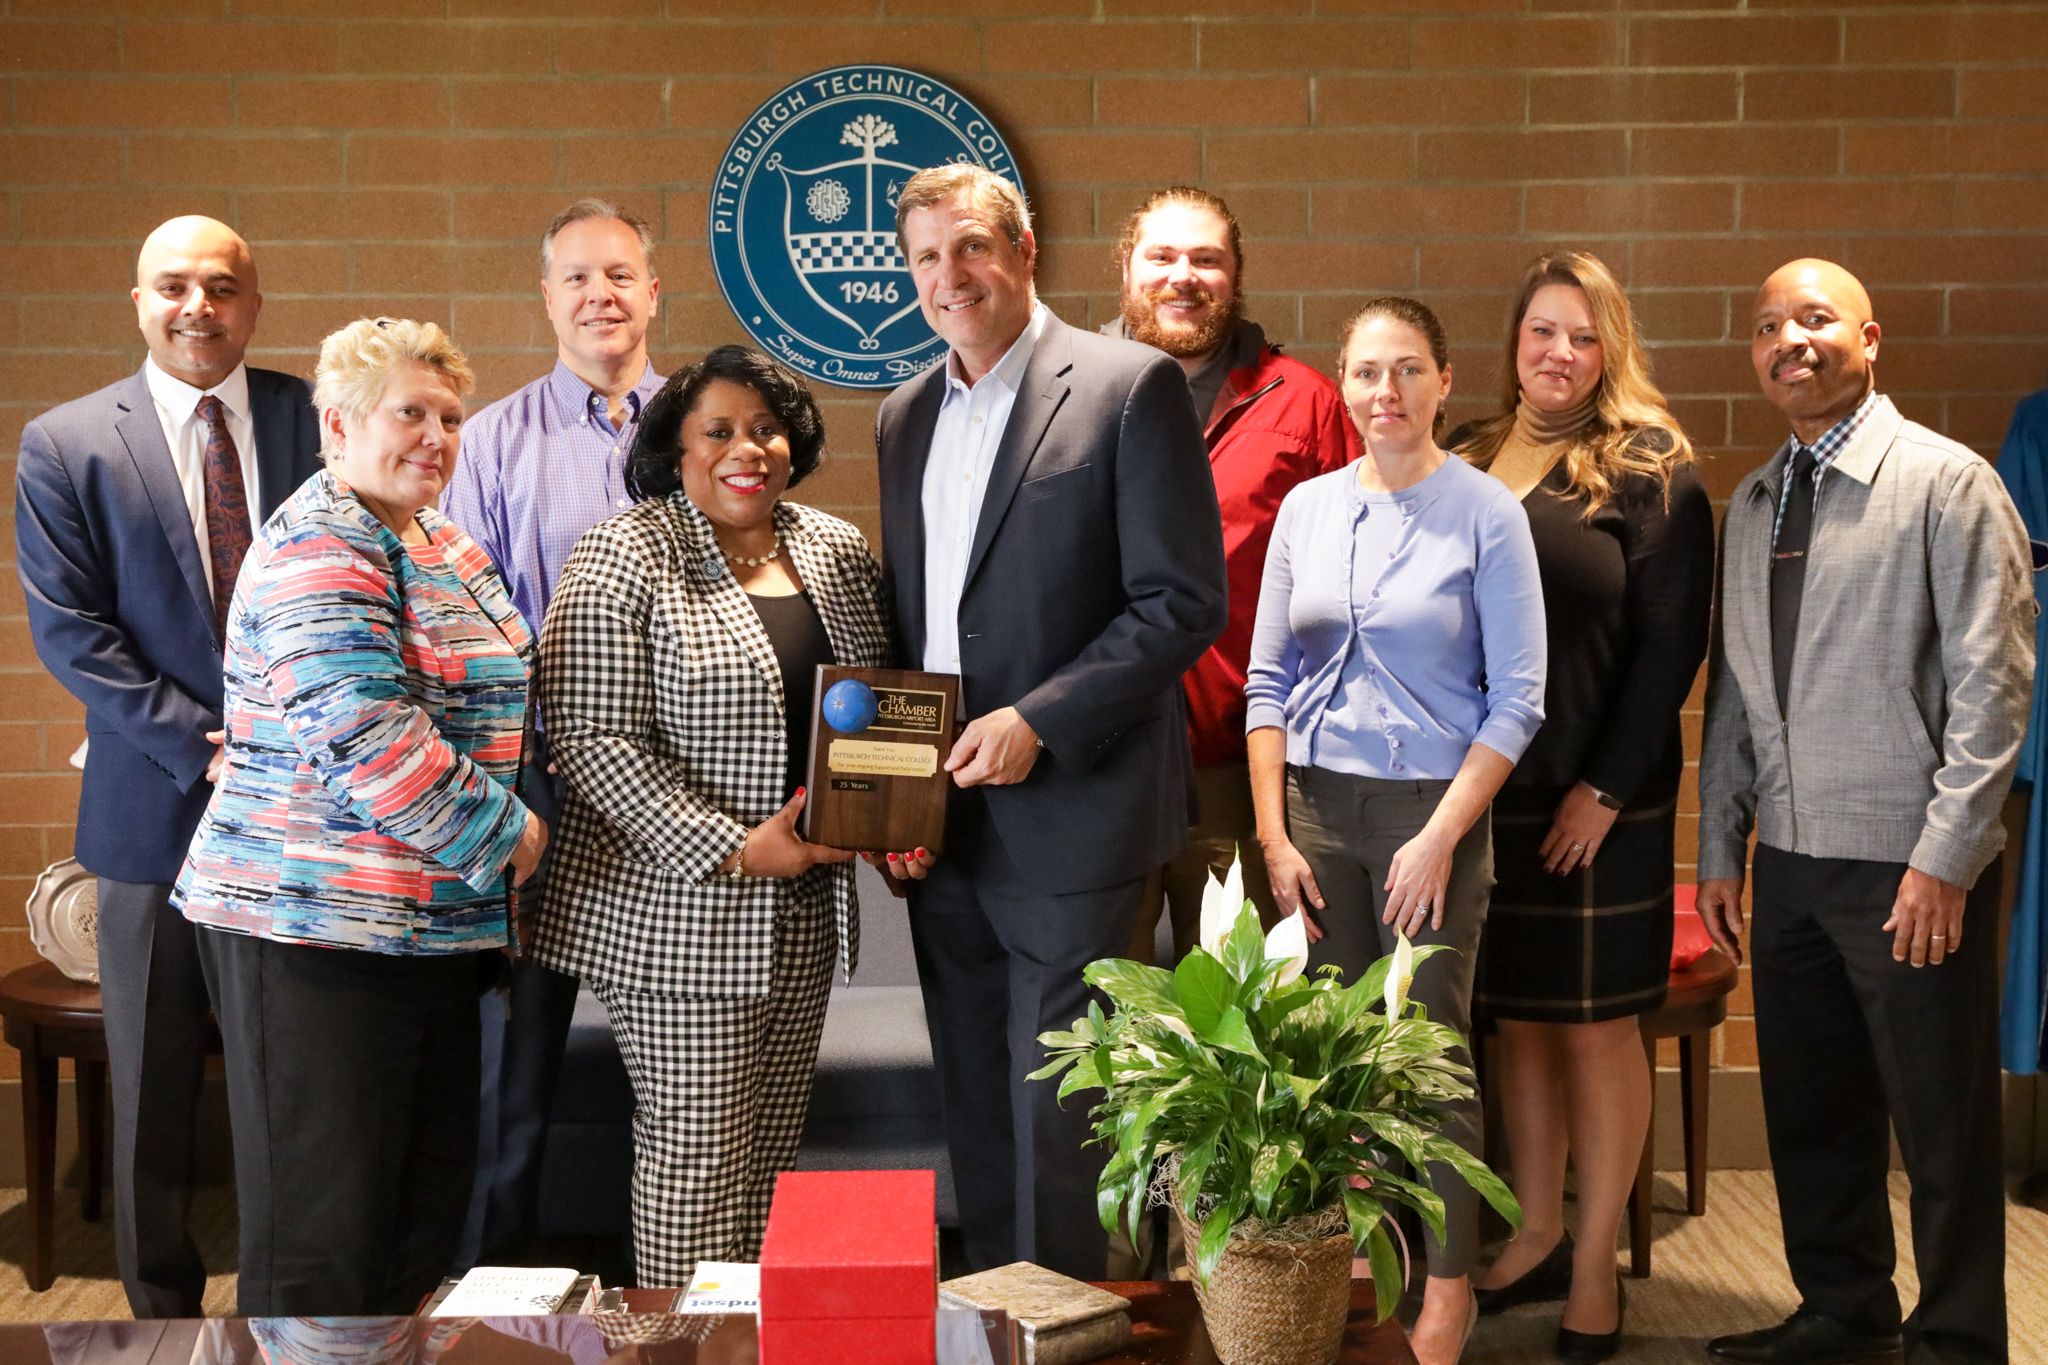 A group photo of Dr. Harvey-Smith, Rodney Clark, Sunjay Bali and PGH Airport Chamber posing with the 25 Year Membership plaque.